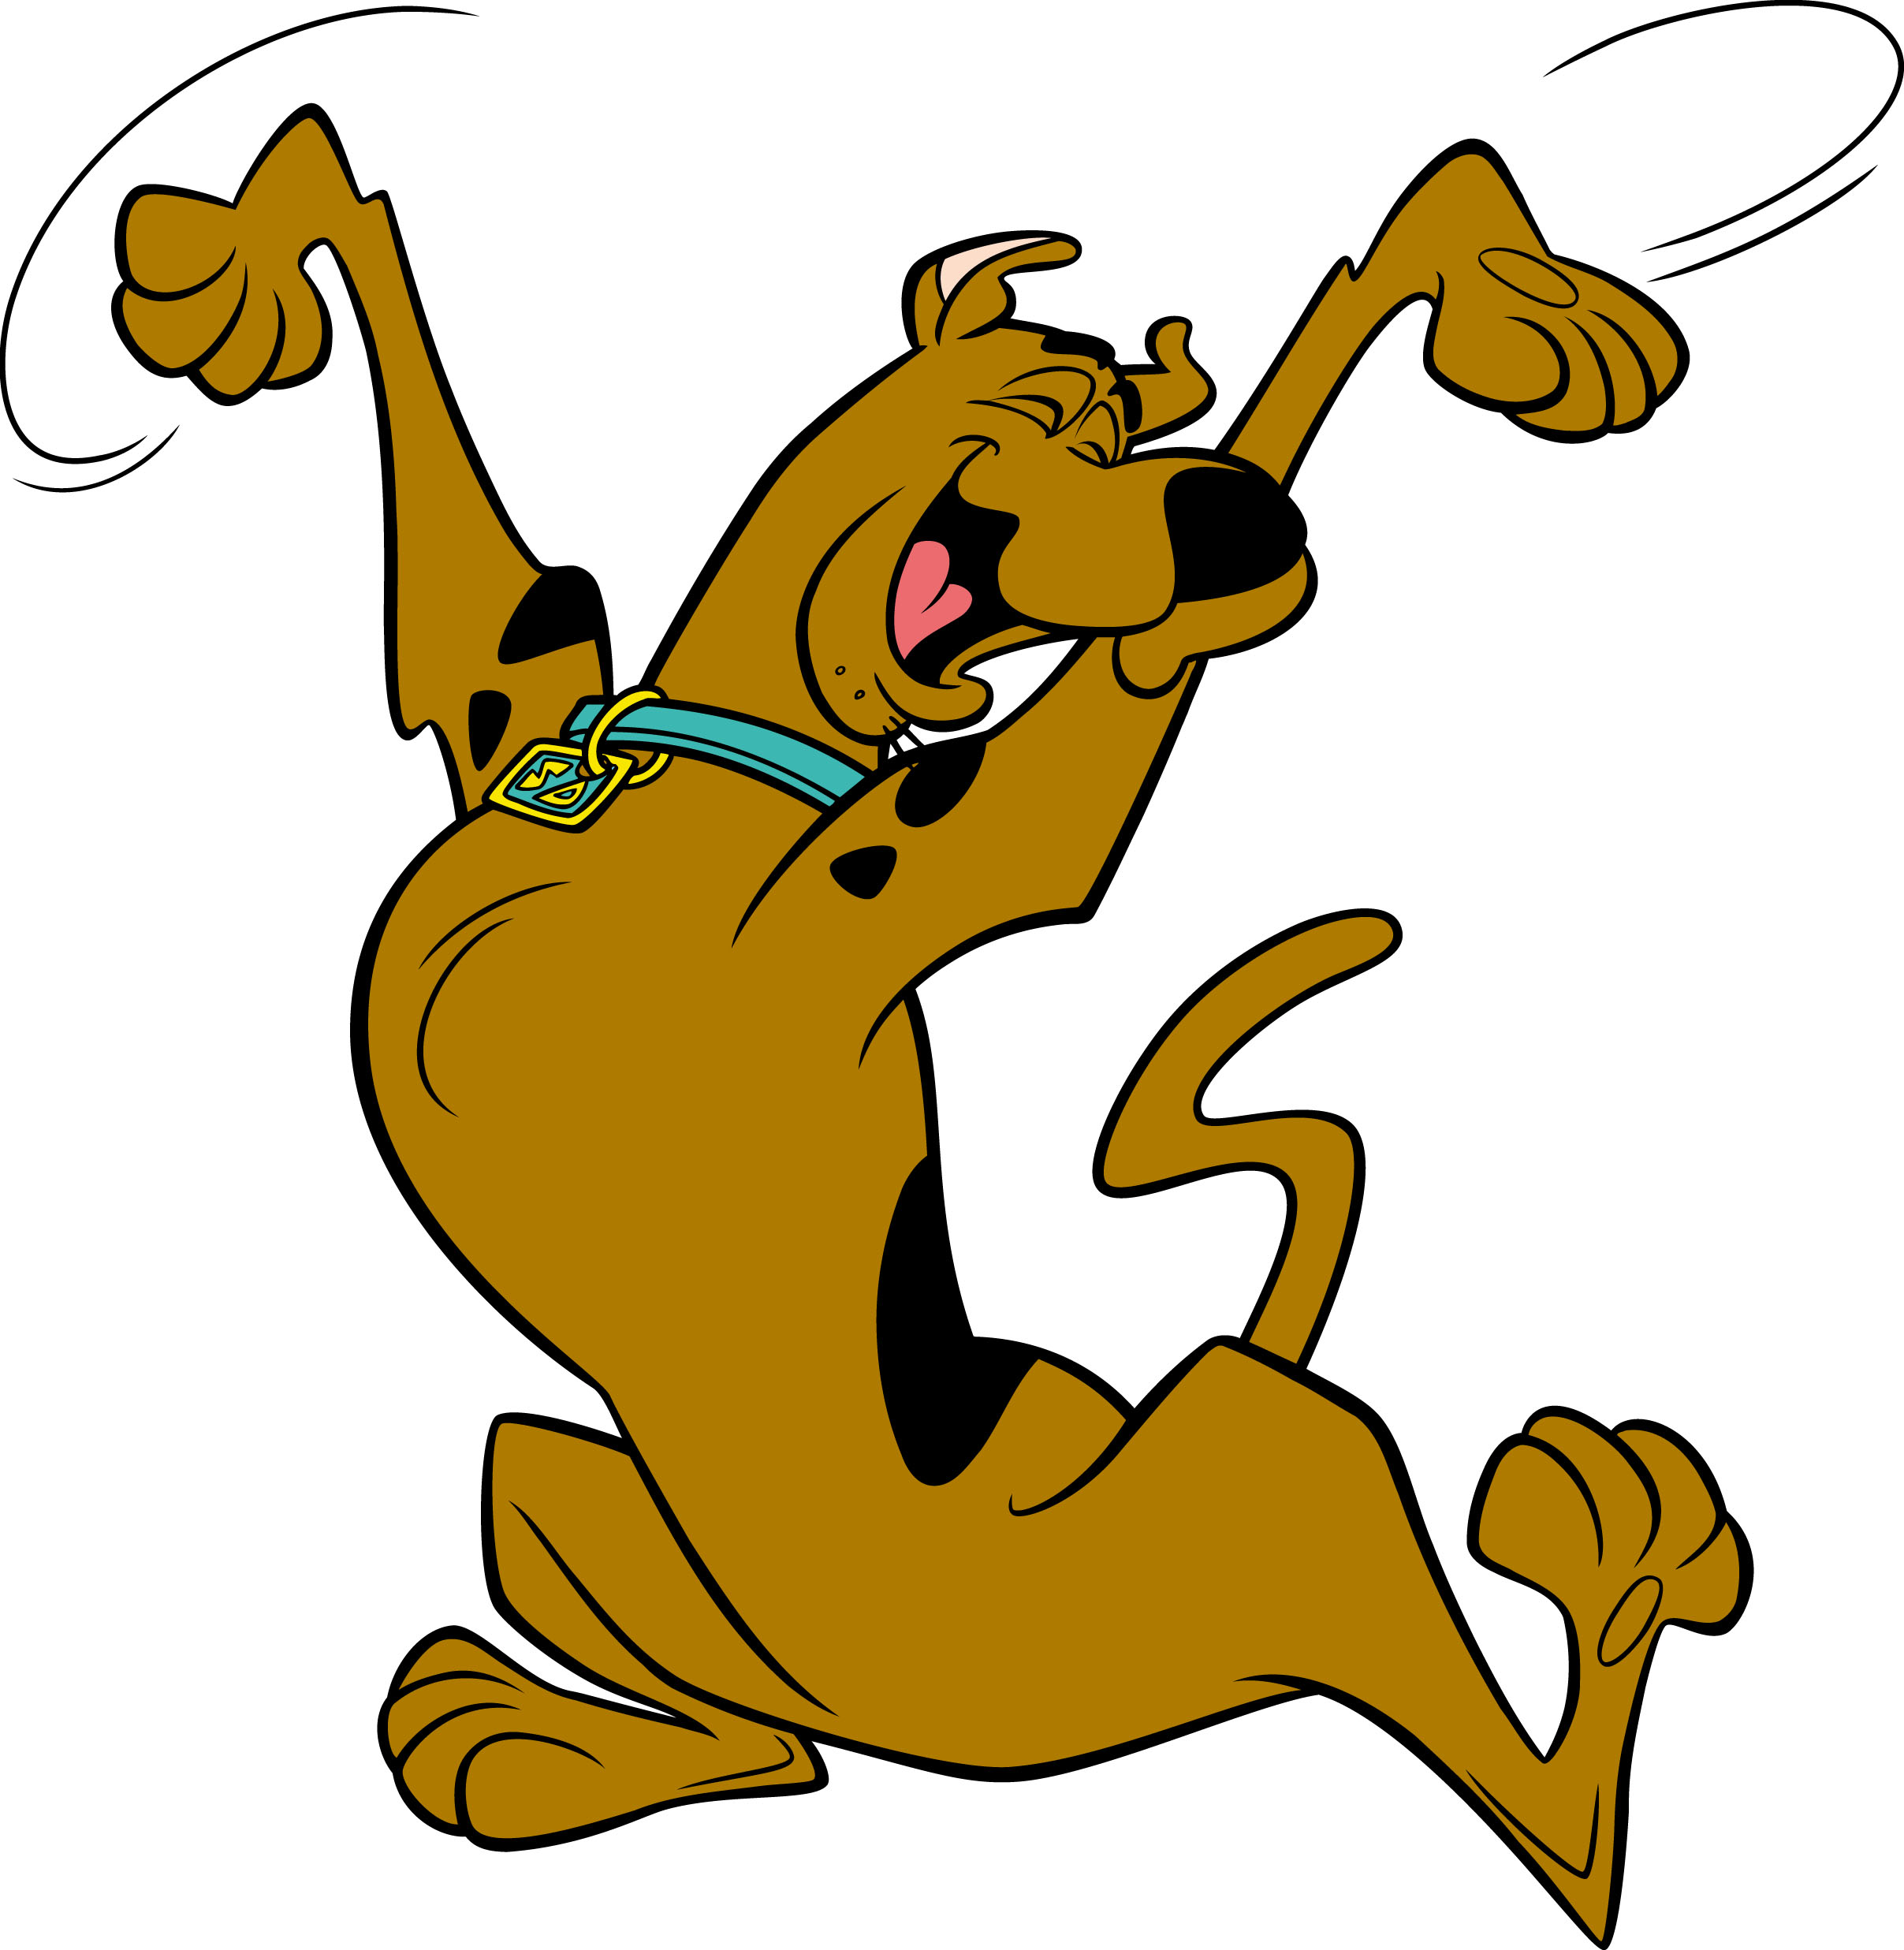 The 20 most famous cartoon dogs (part 1) - Dog names